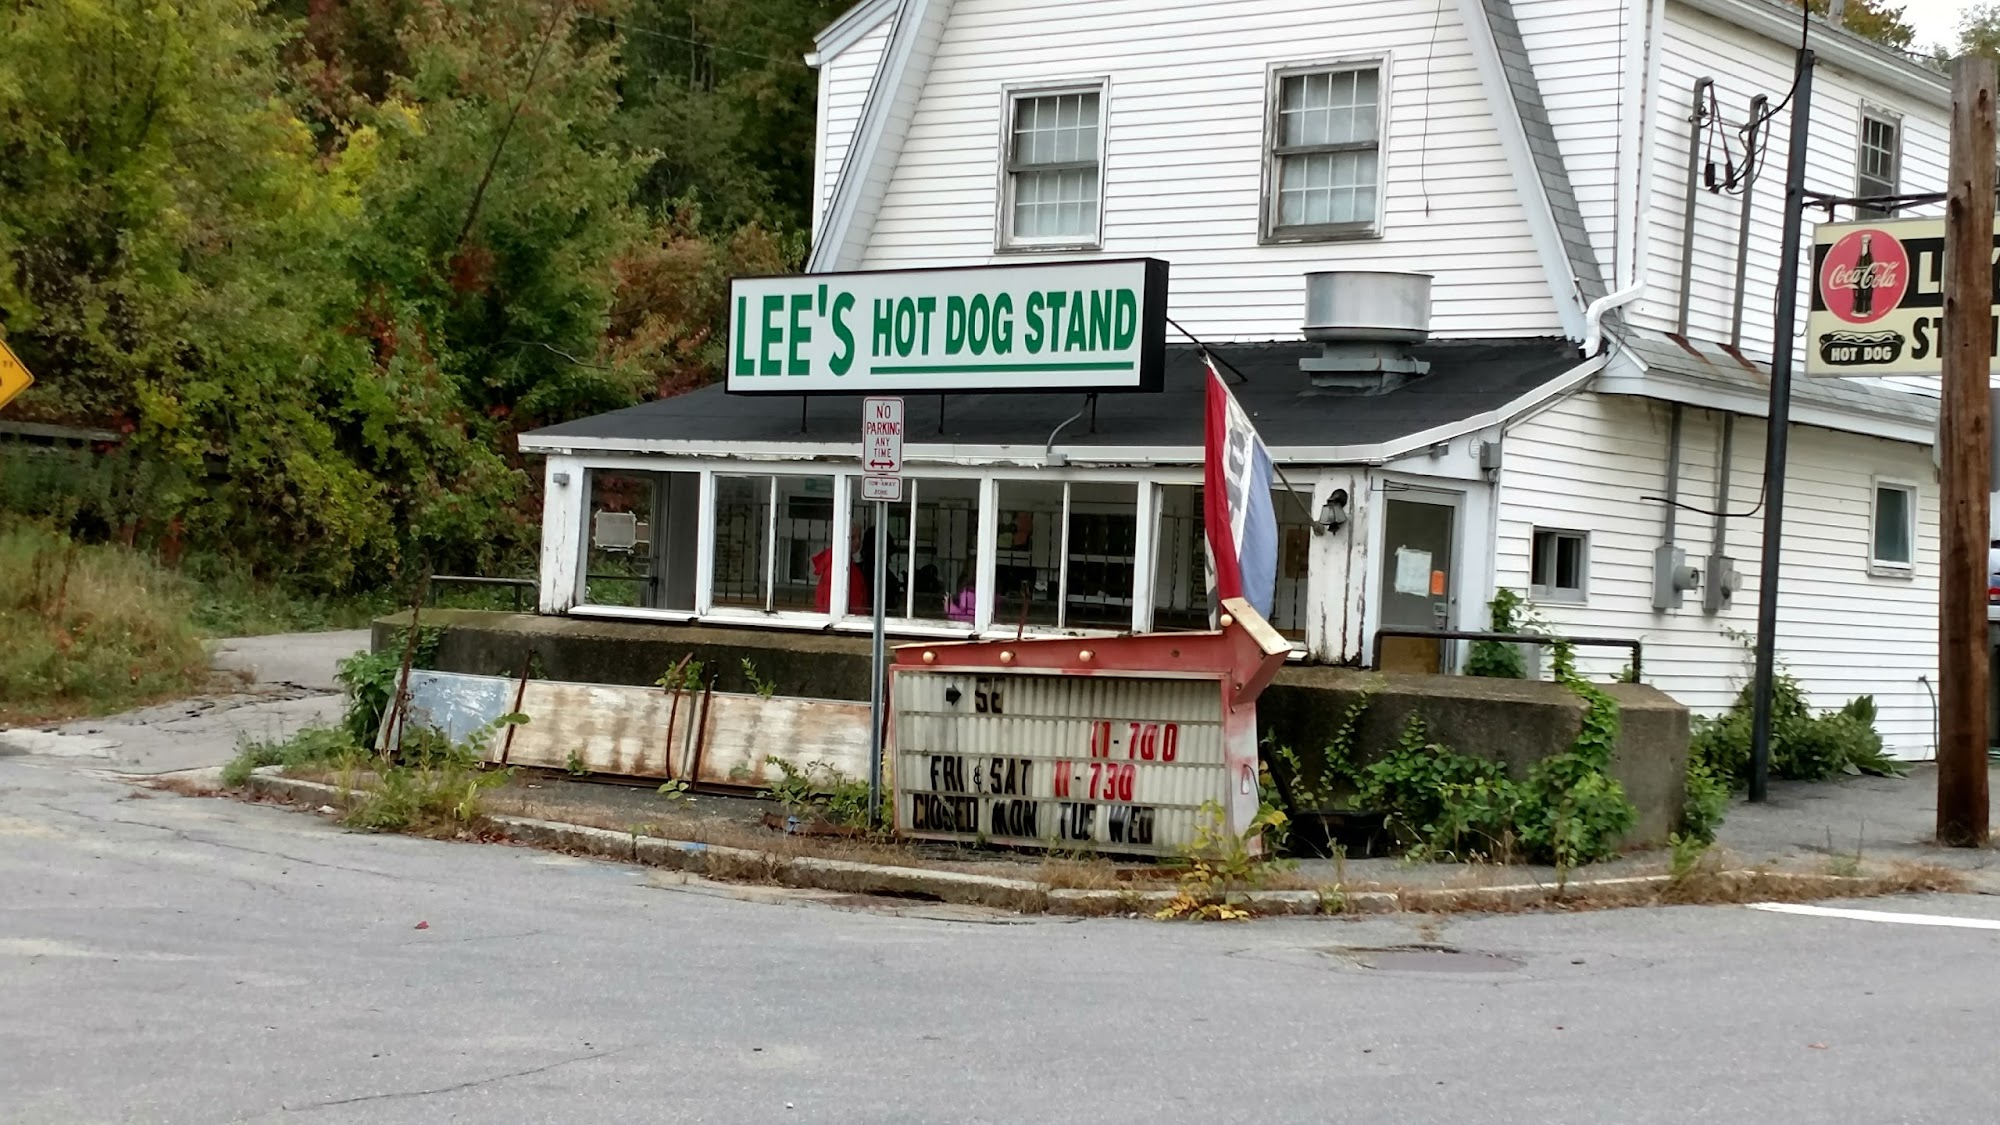 Lee's Hot Dog Stand